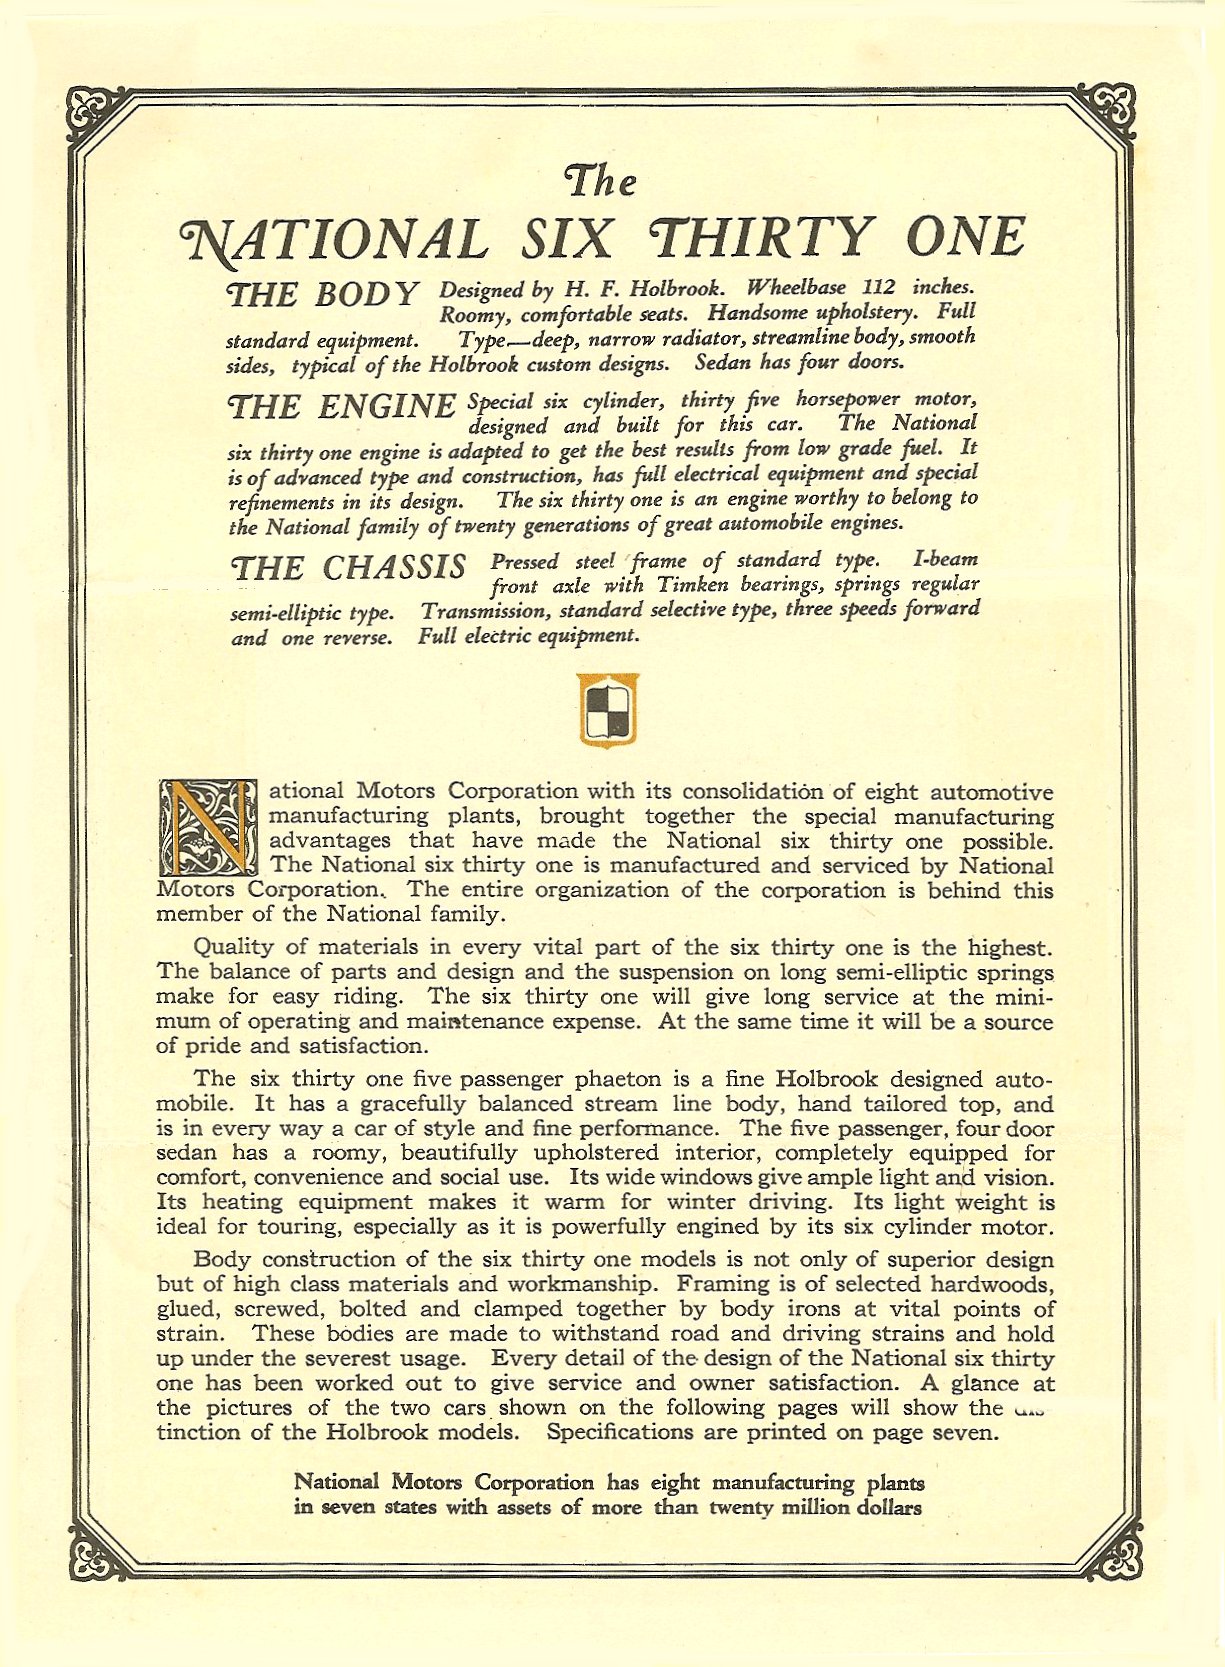 1923_National_Six_Thirty_One-03